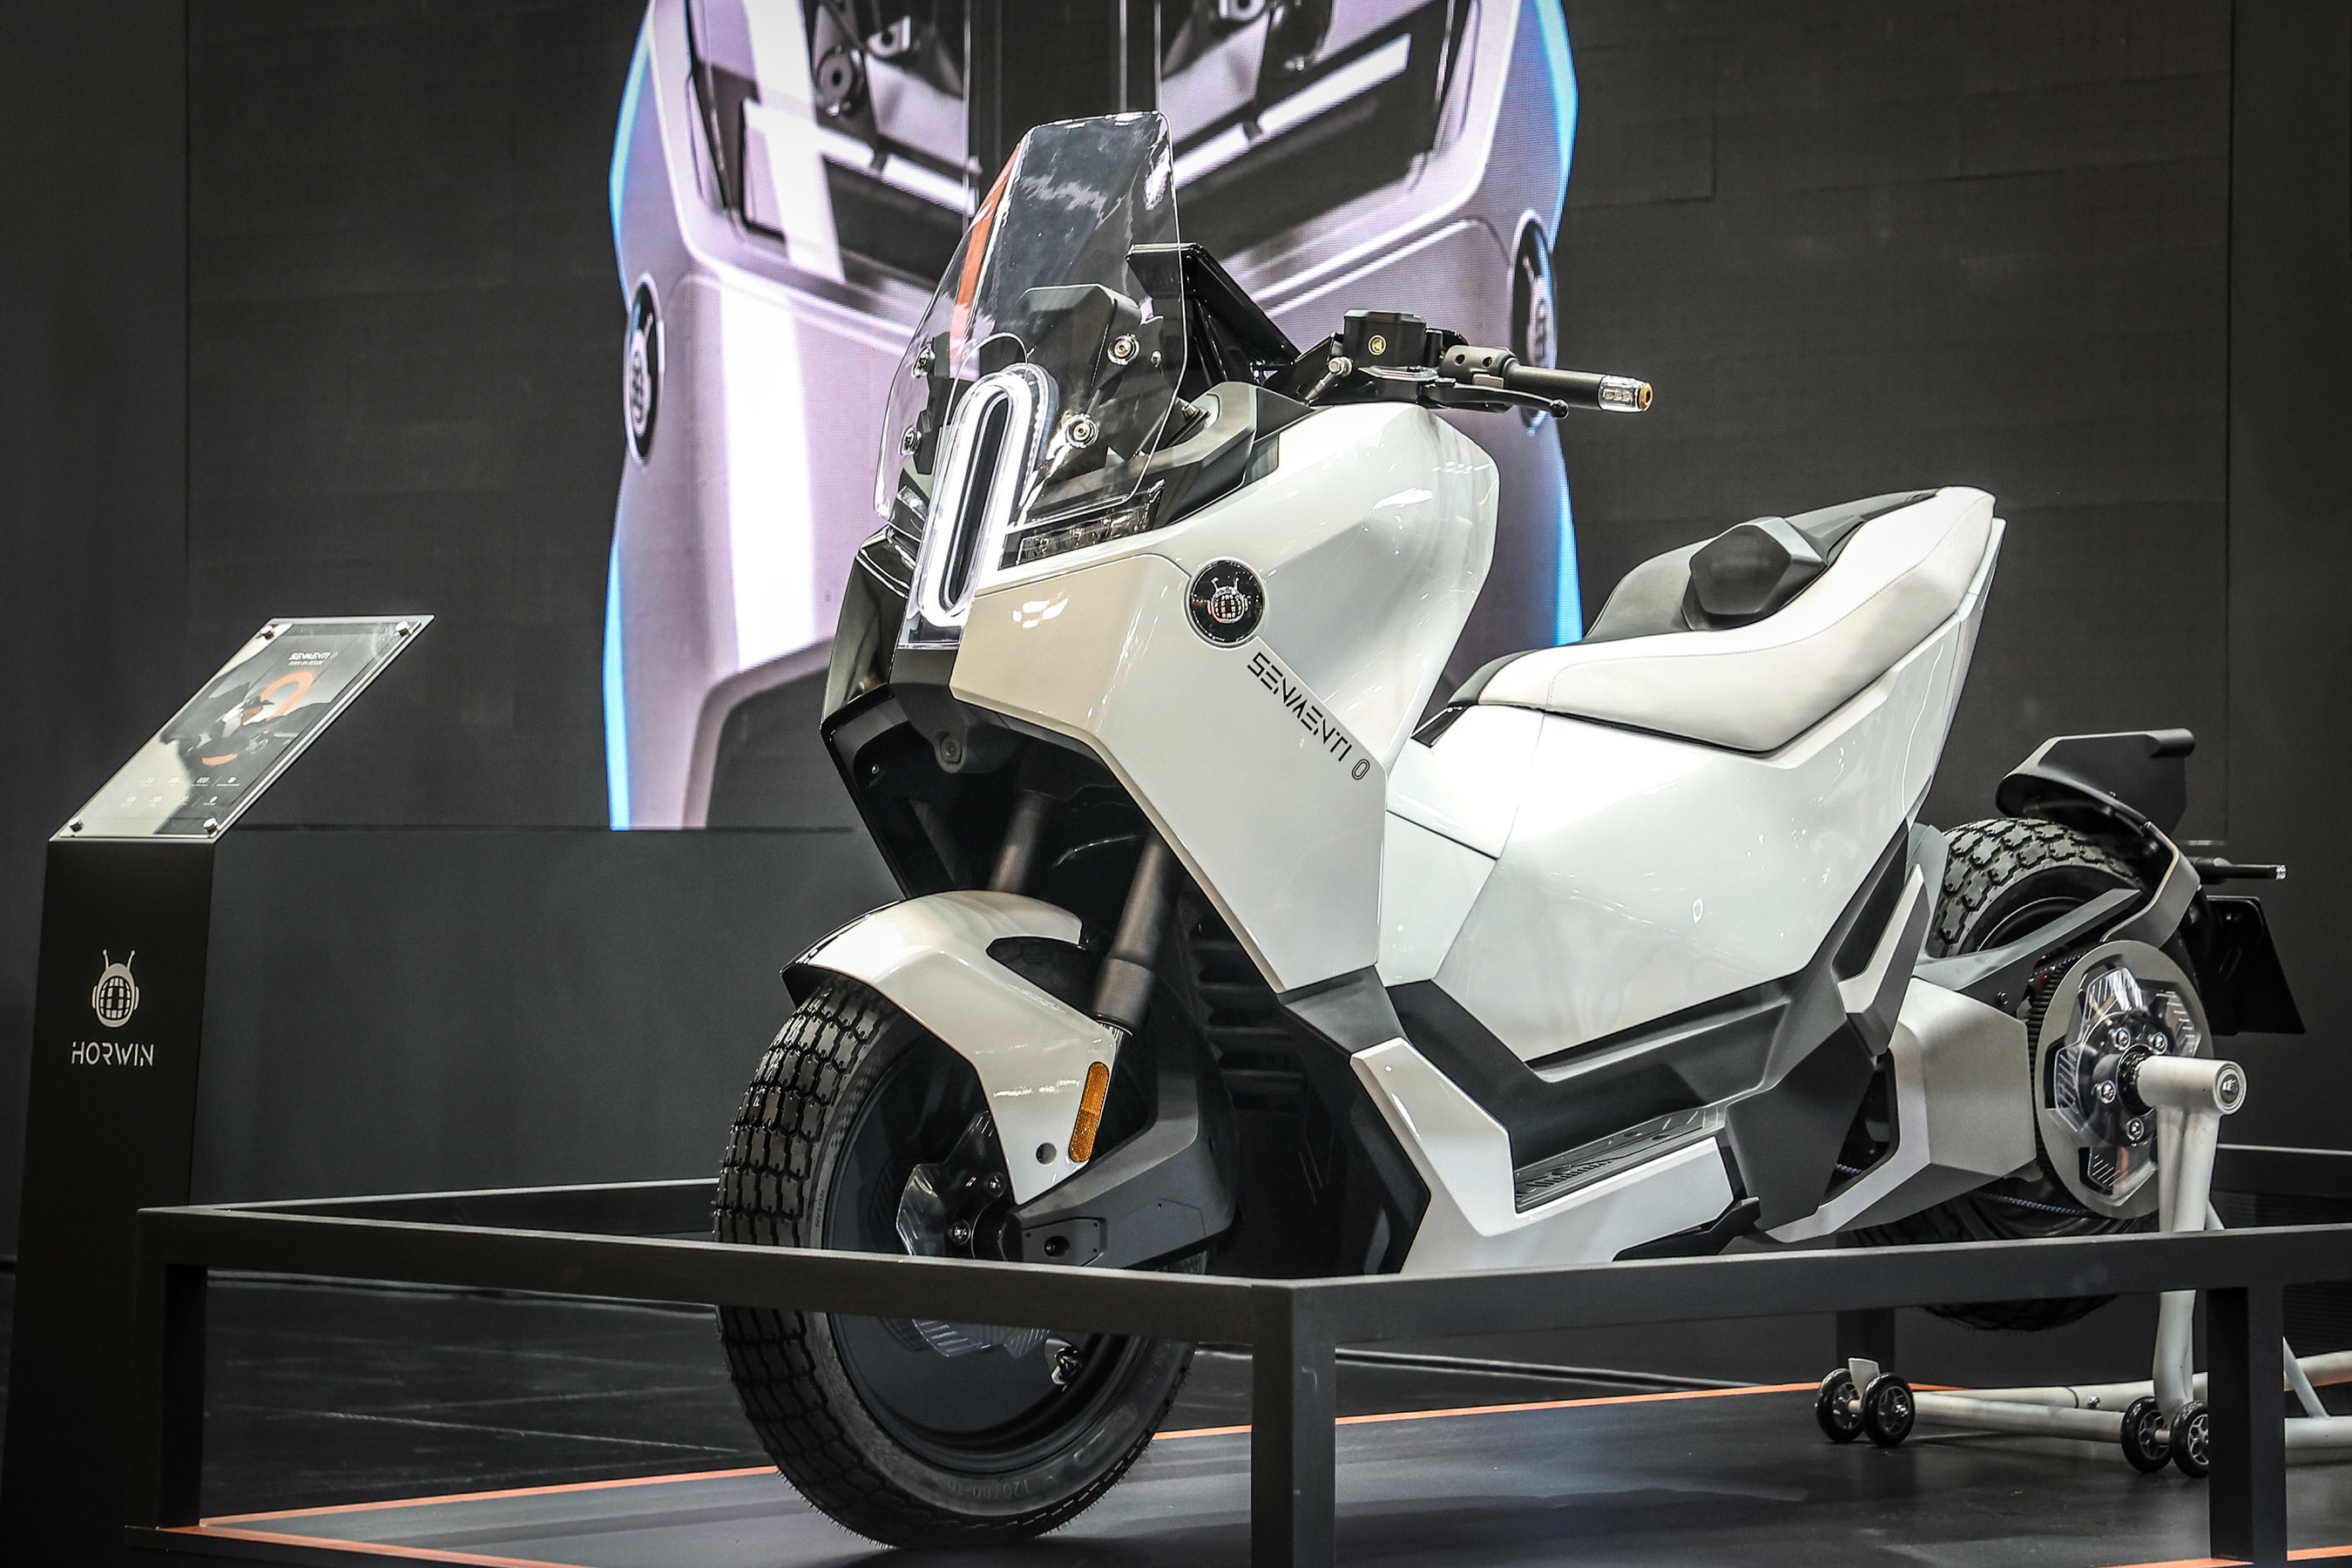 HORWIN presents a unique high-performance e-motorcycle with a top speed of 200 km/h at EICMA 2022